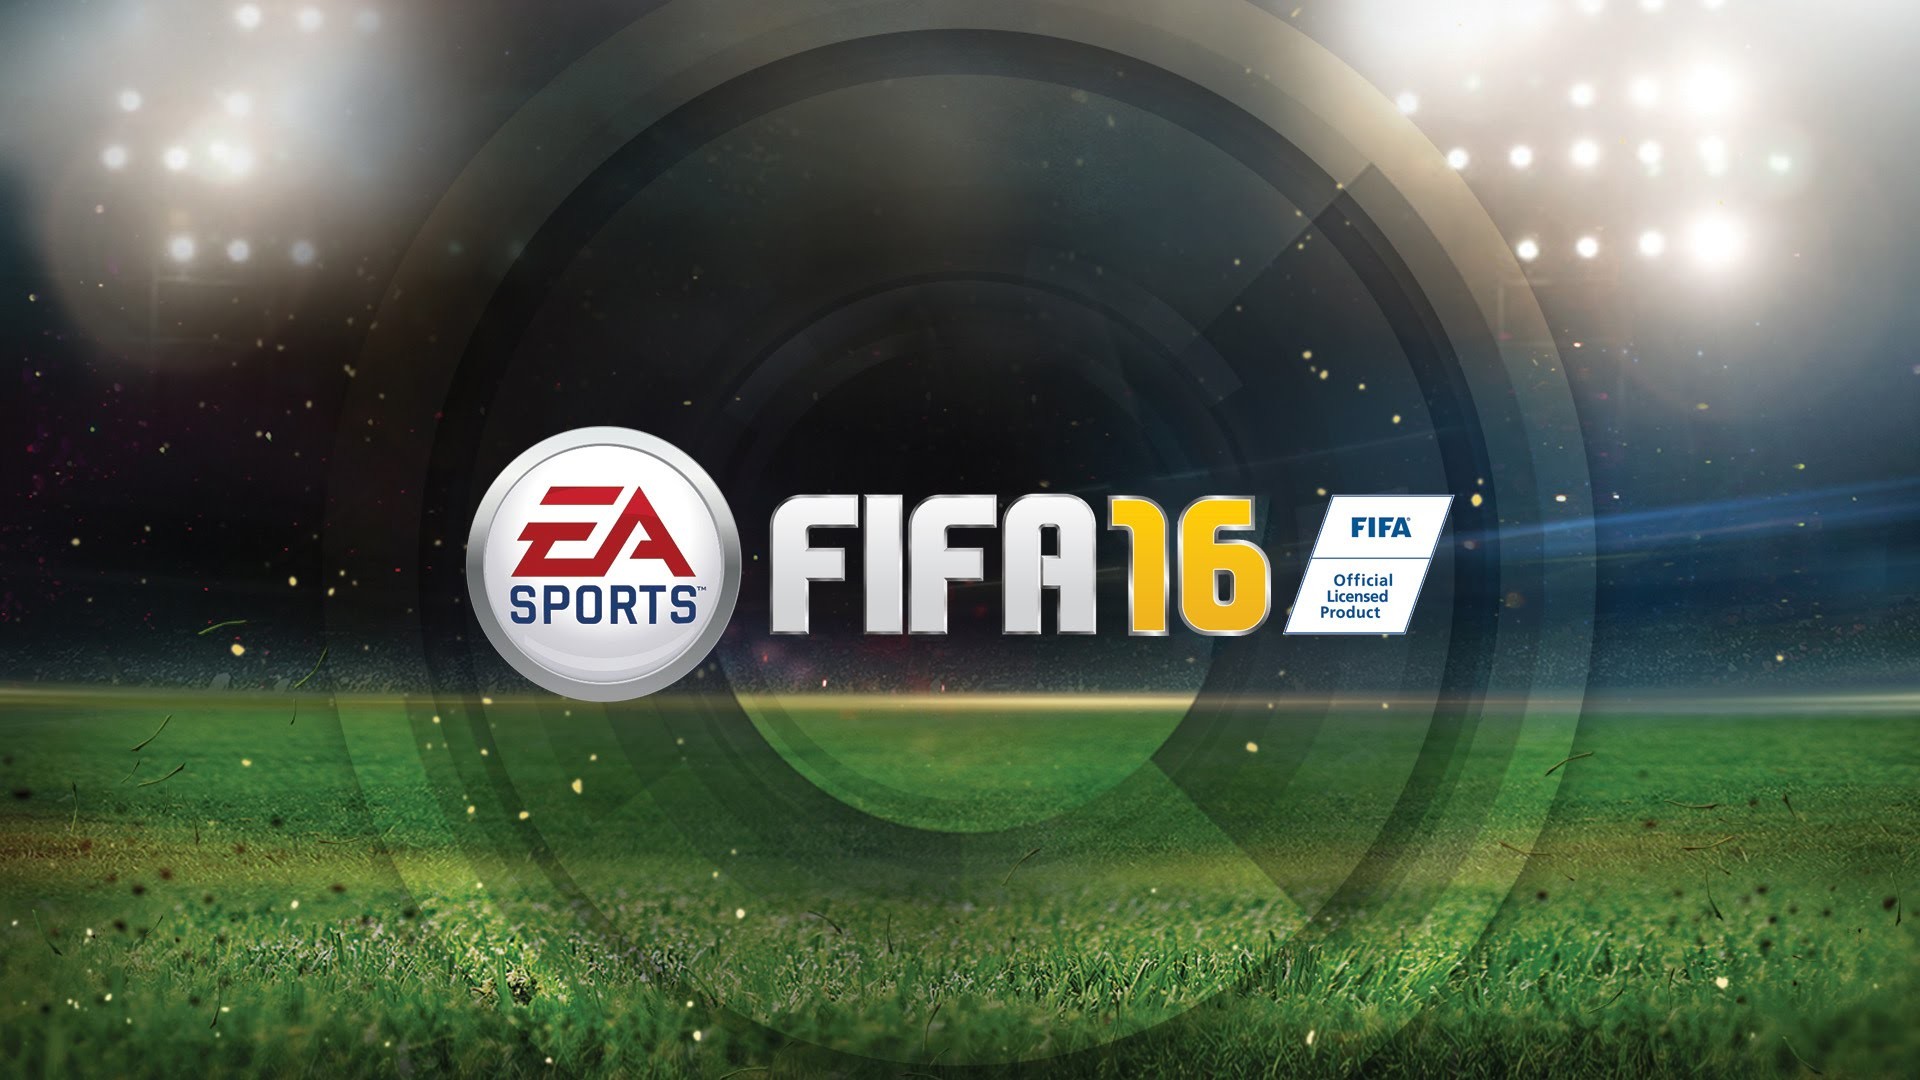 1920x1080 FIFA 16 news, tips, tricks and techniques - everything you need to know |  Expert Reviews